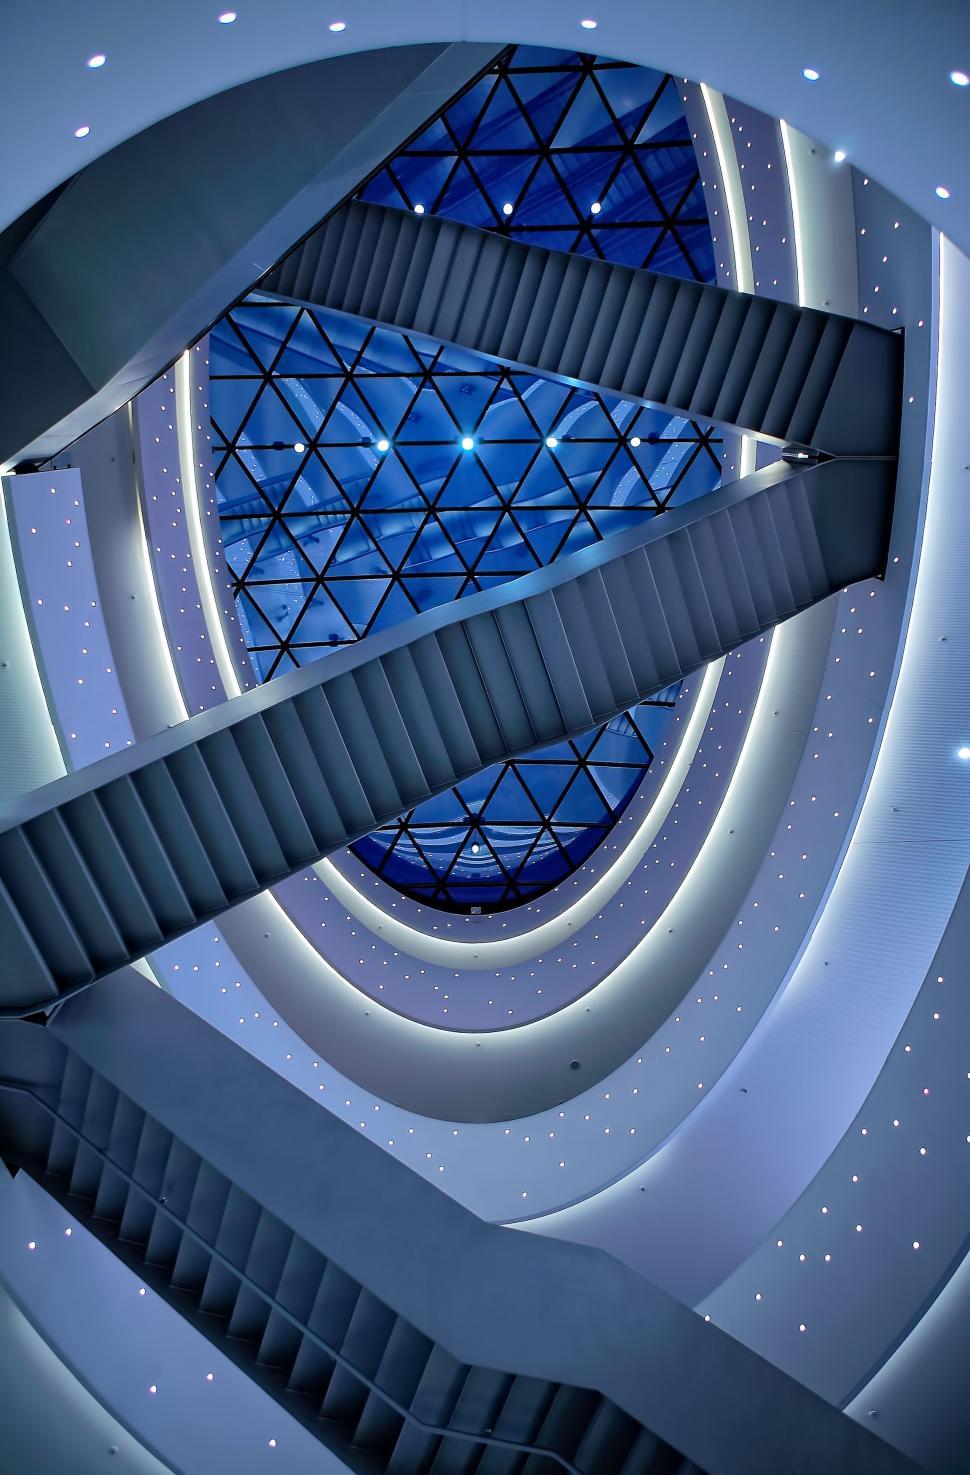 Free Image of Grand Spiral Staircase With Skylight 